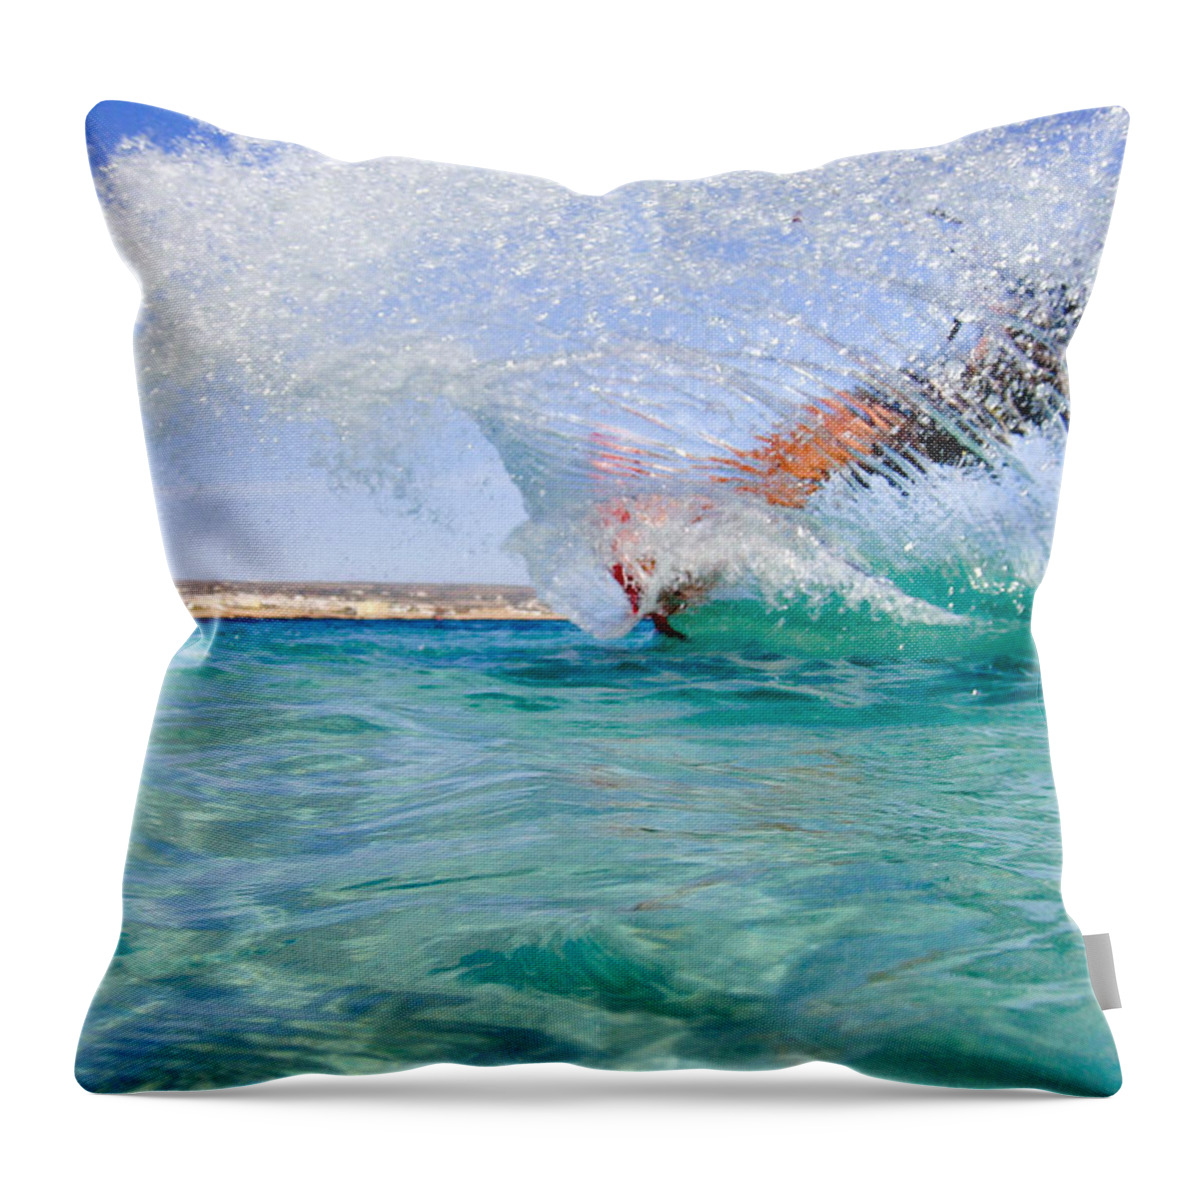 Adventure Throw Pillow featuring the photograph Kitesurfing #2 by Stelios Kleanthous